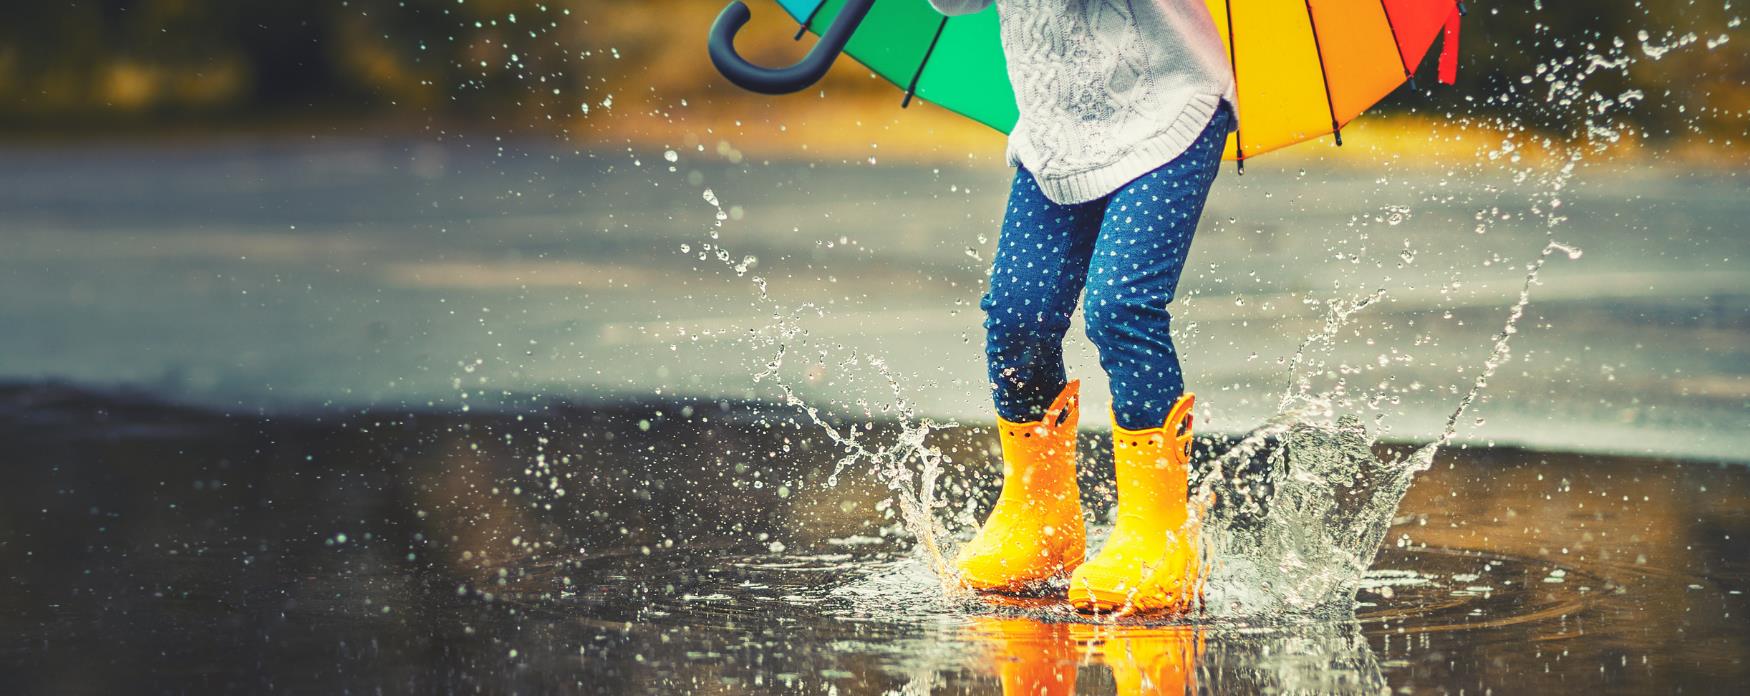 A child jumping in puddles of water